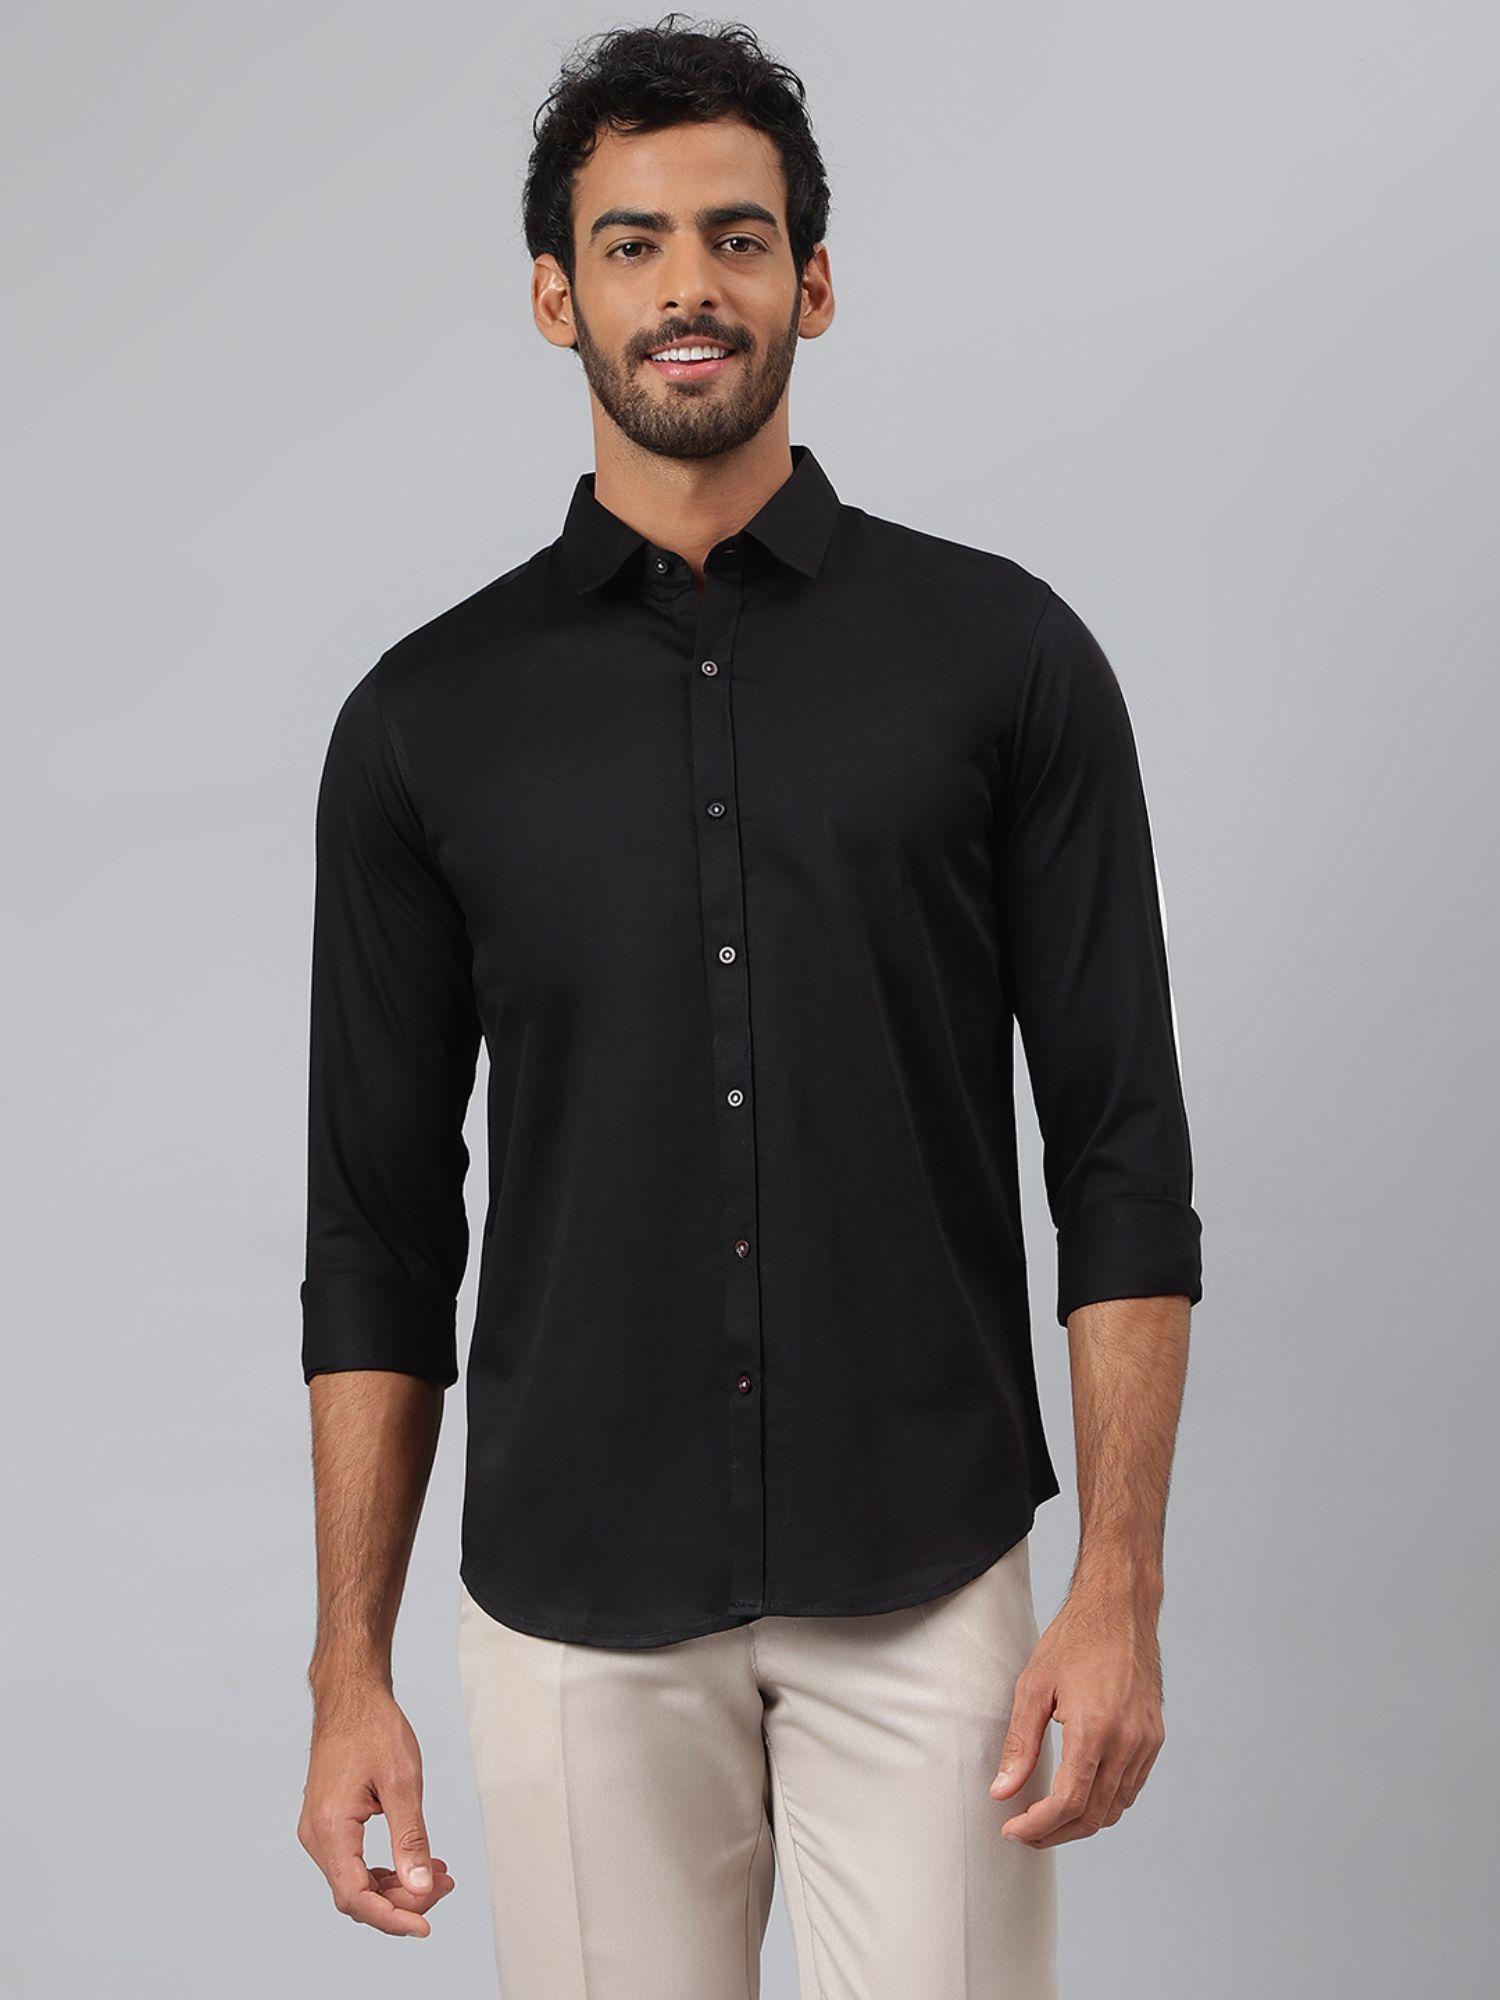 black cotton solid casual shirt